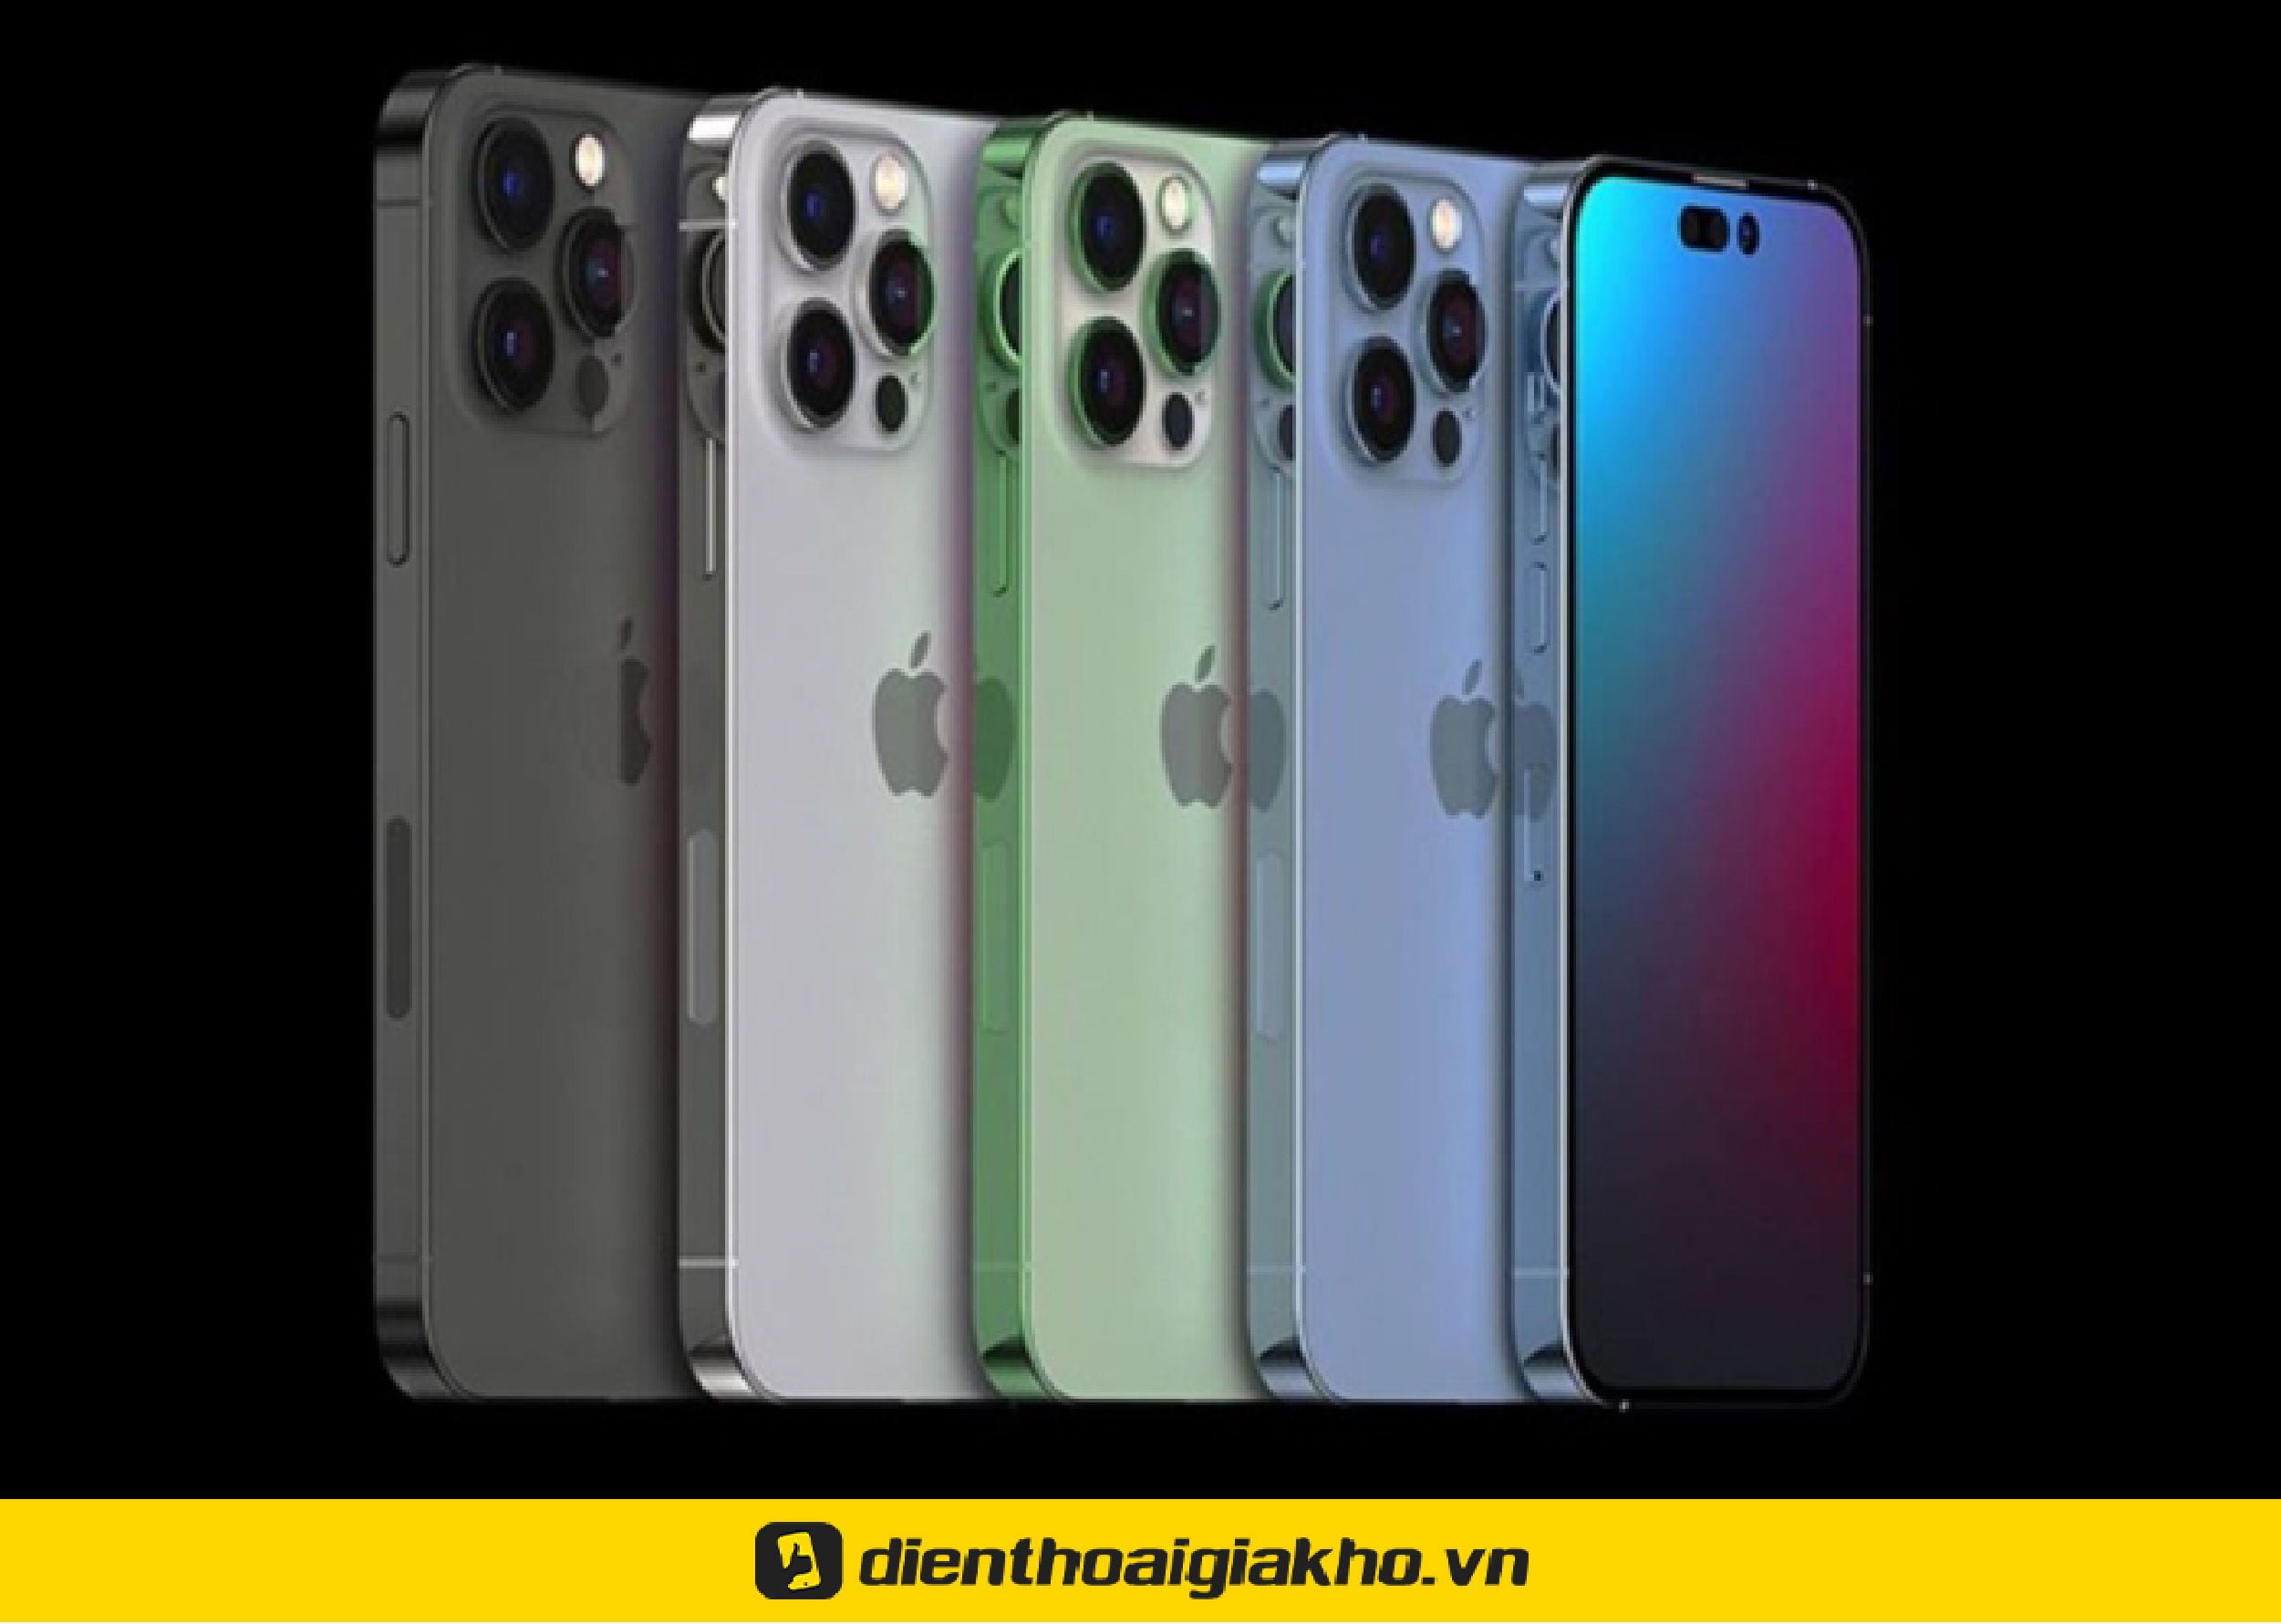 iPhone ngừng sản xuất